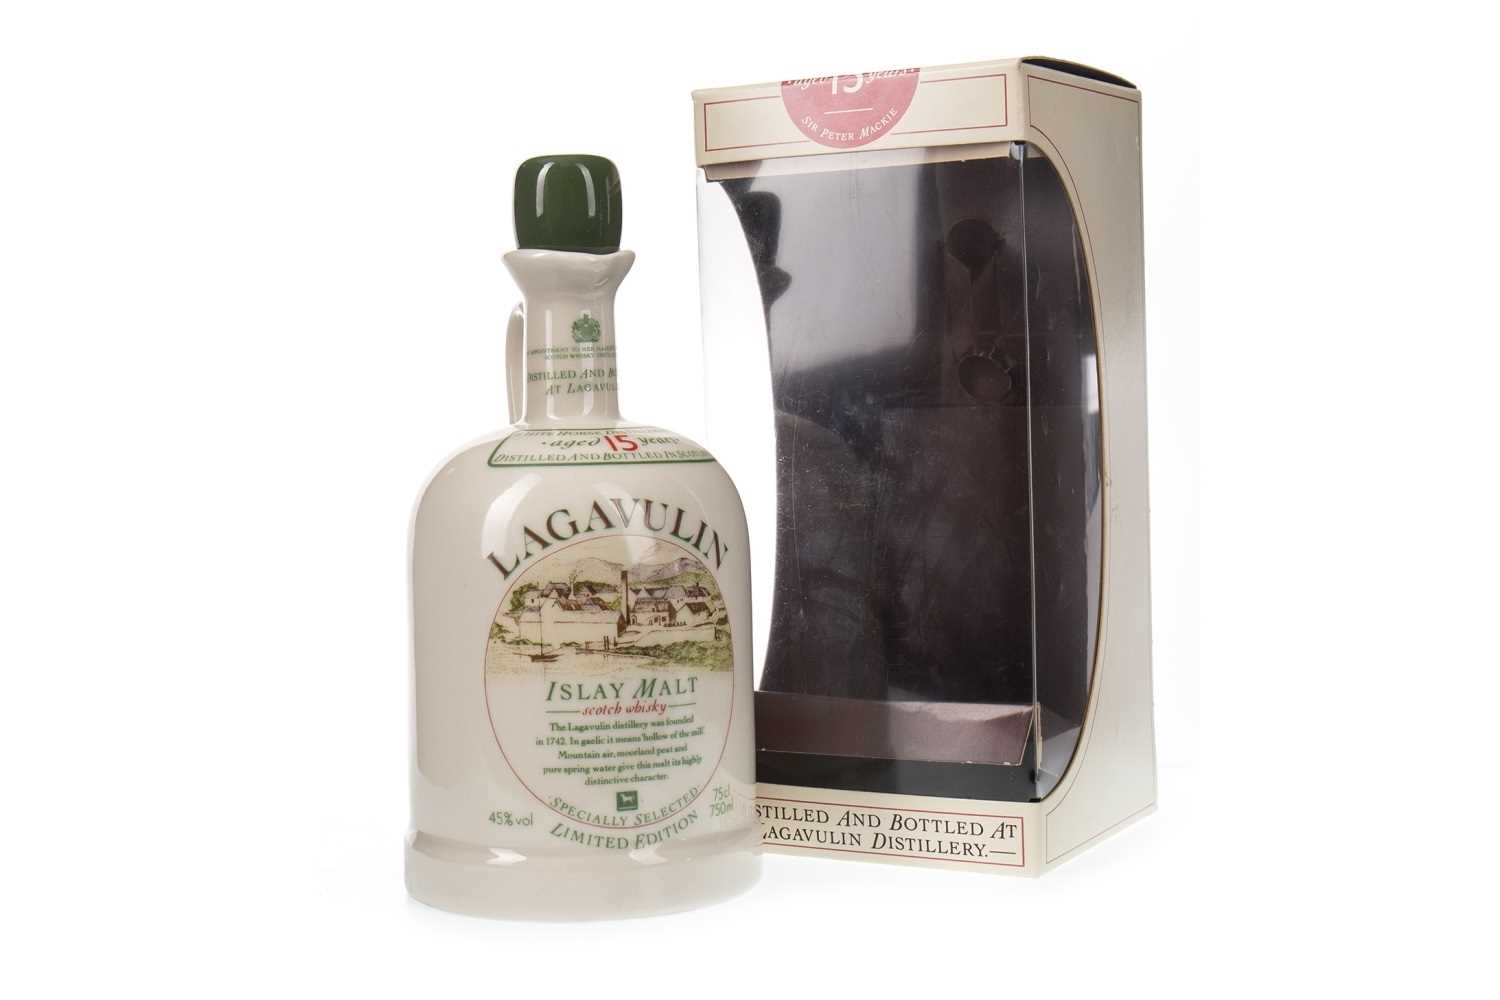 Lot 185 - LAGAVULIN WHITE HORSE DECANTER AGED 15 YEARS